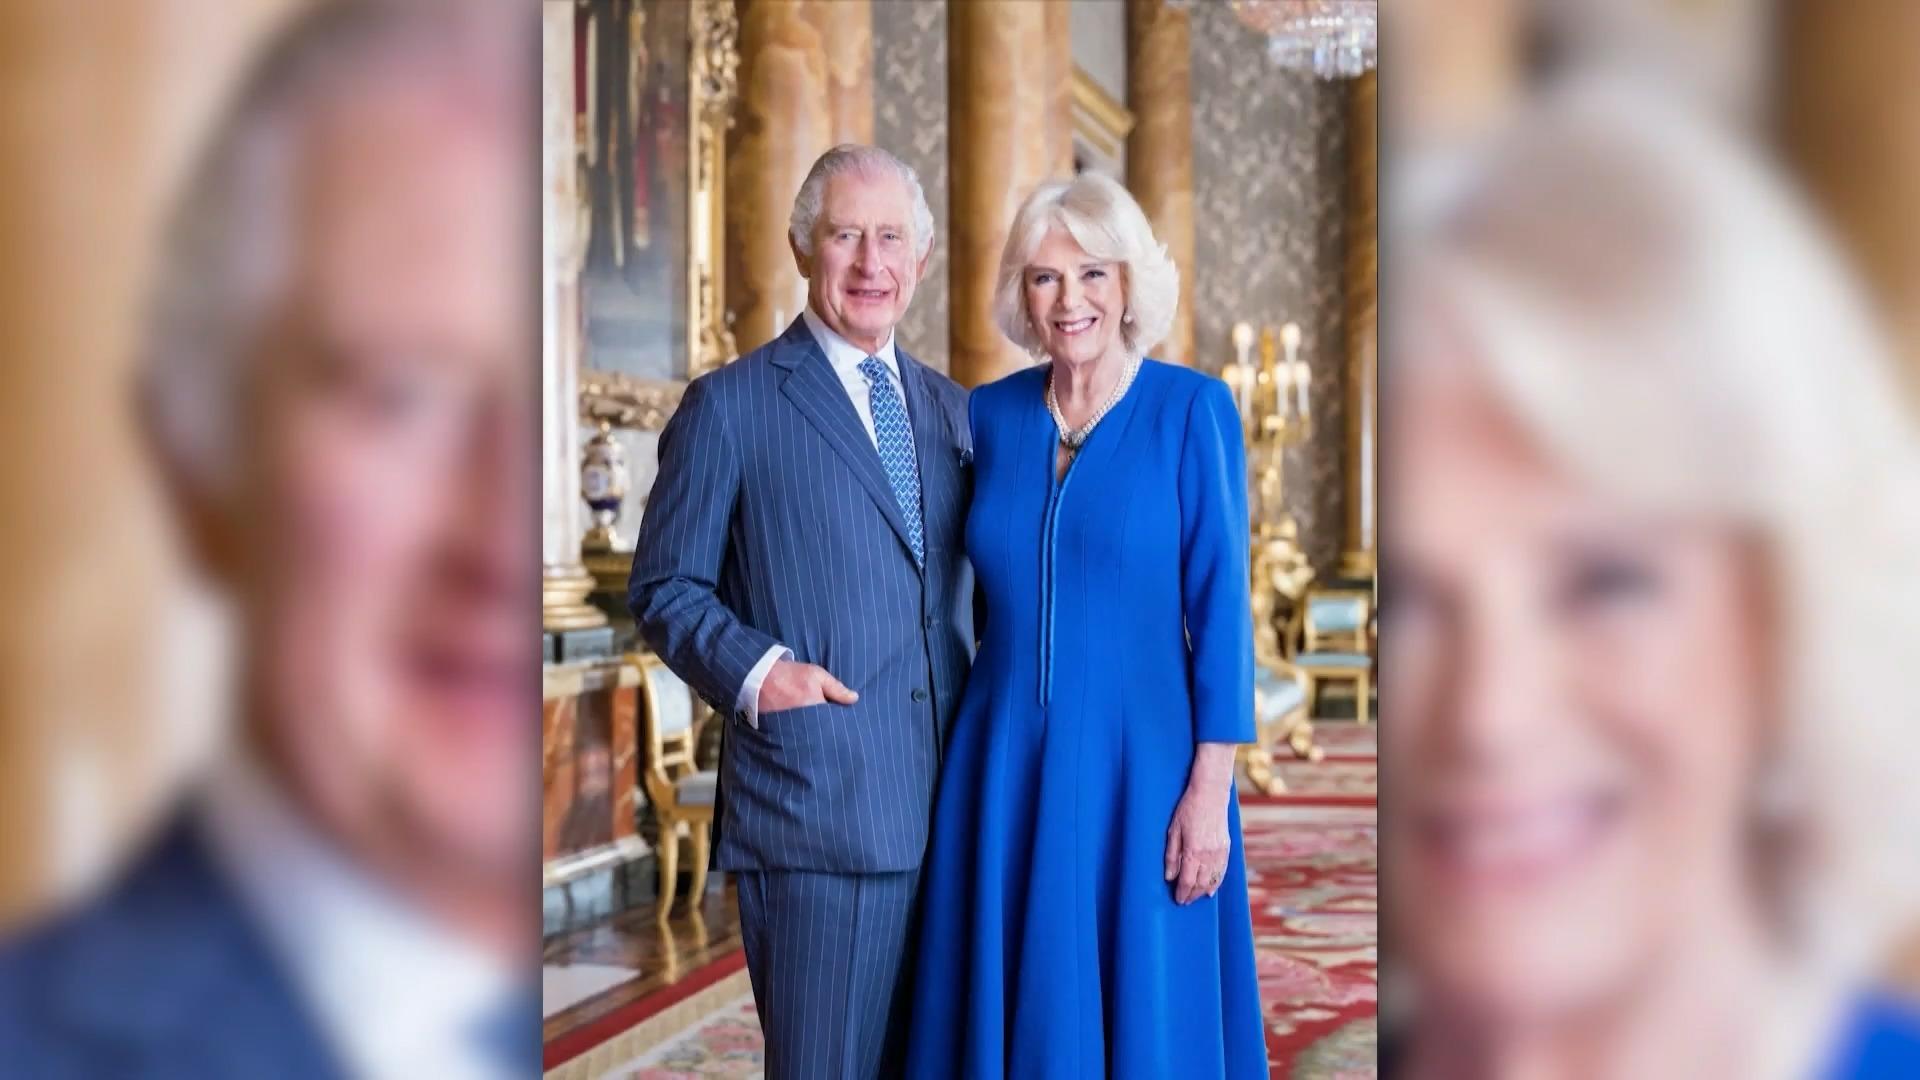 Here Camilla is first mentioned as "queen" titled None "Queen Consort" more